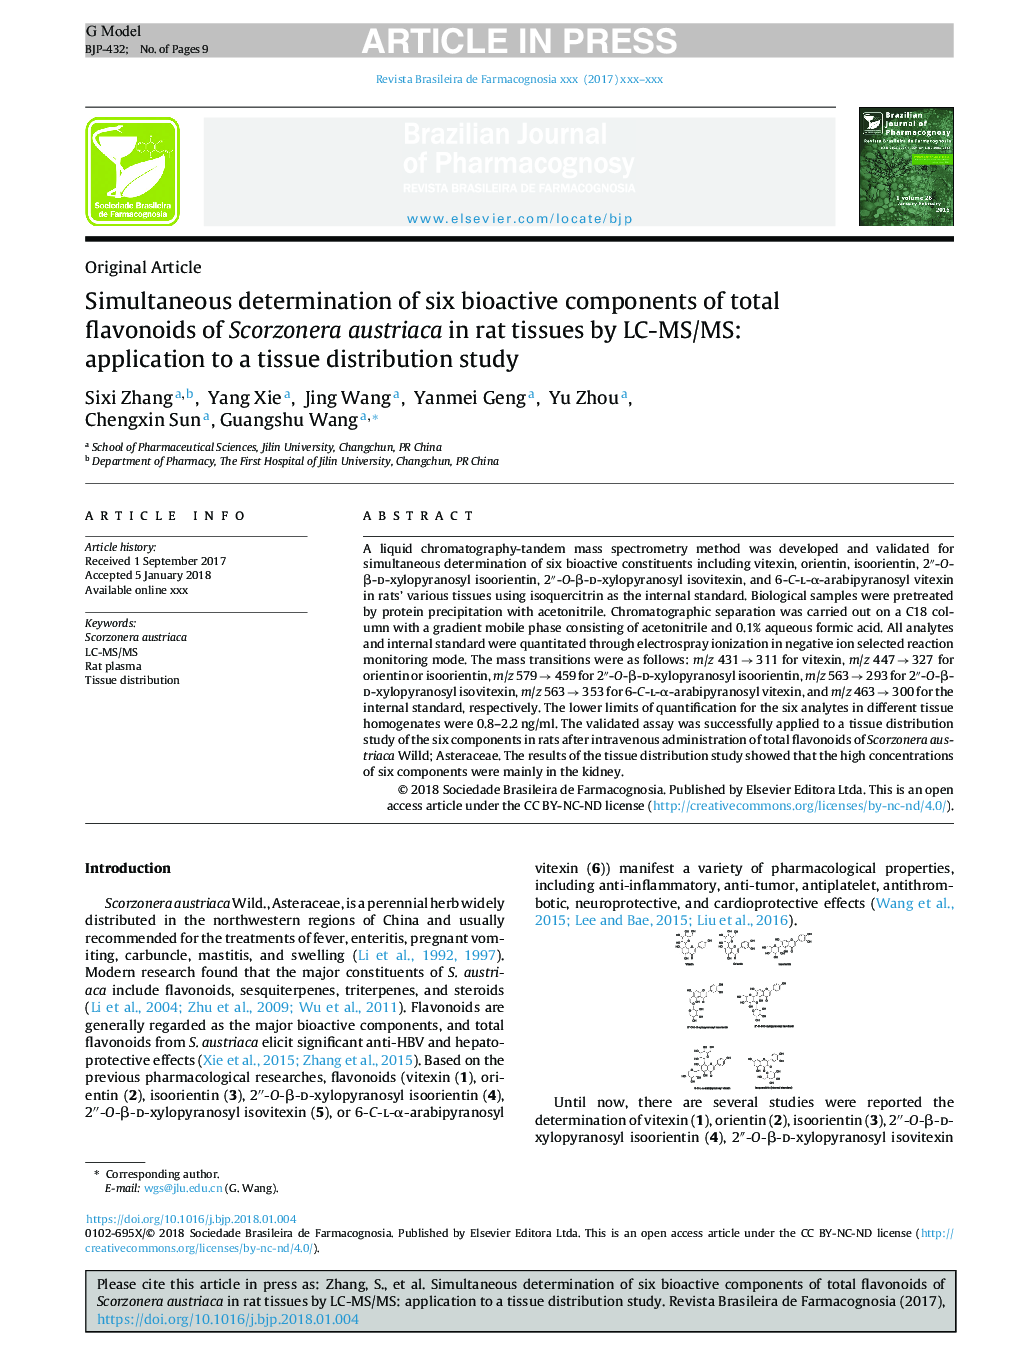 Simultaneous determination of six bioactive components of total flavonoids of Scorzonera austriaca in rat tissues by LC-MS/MS: application to a tissue distribution study